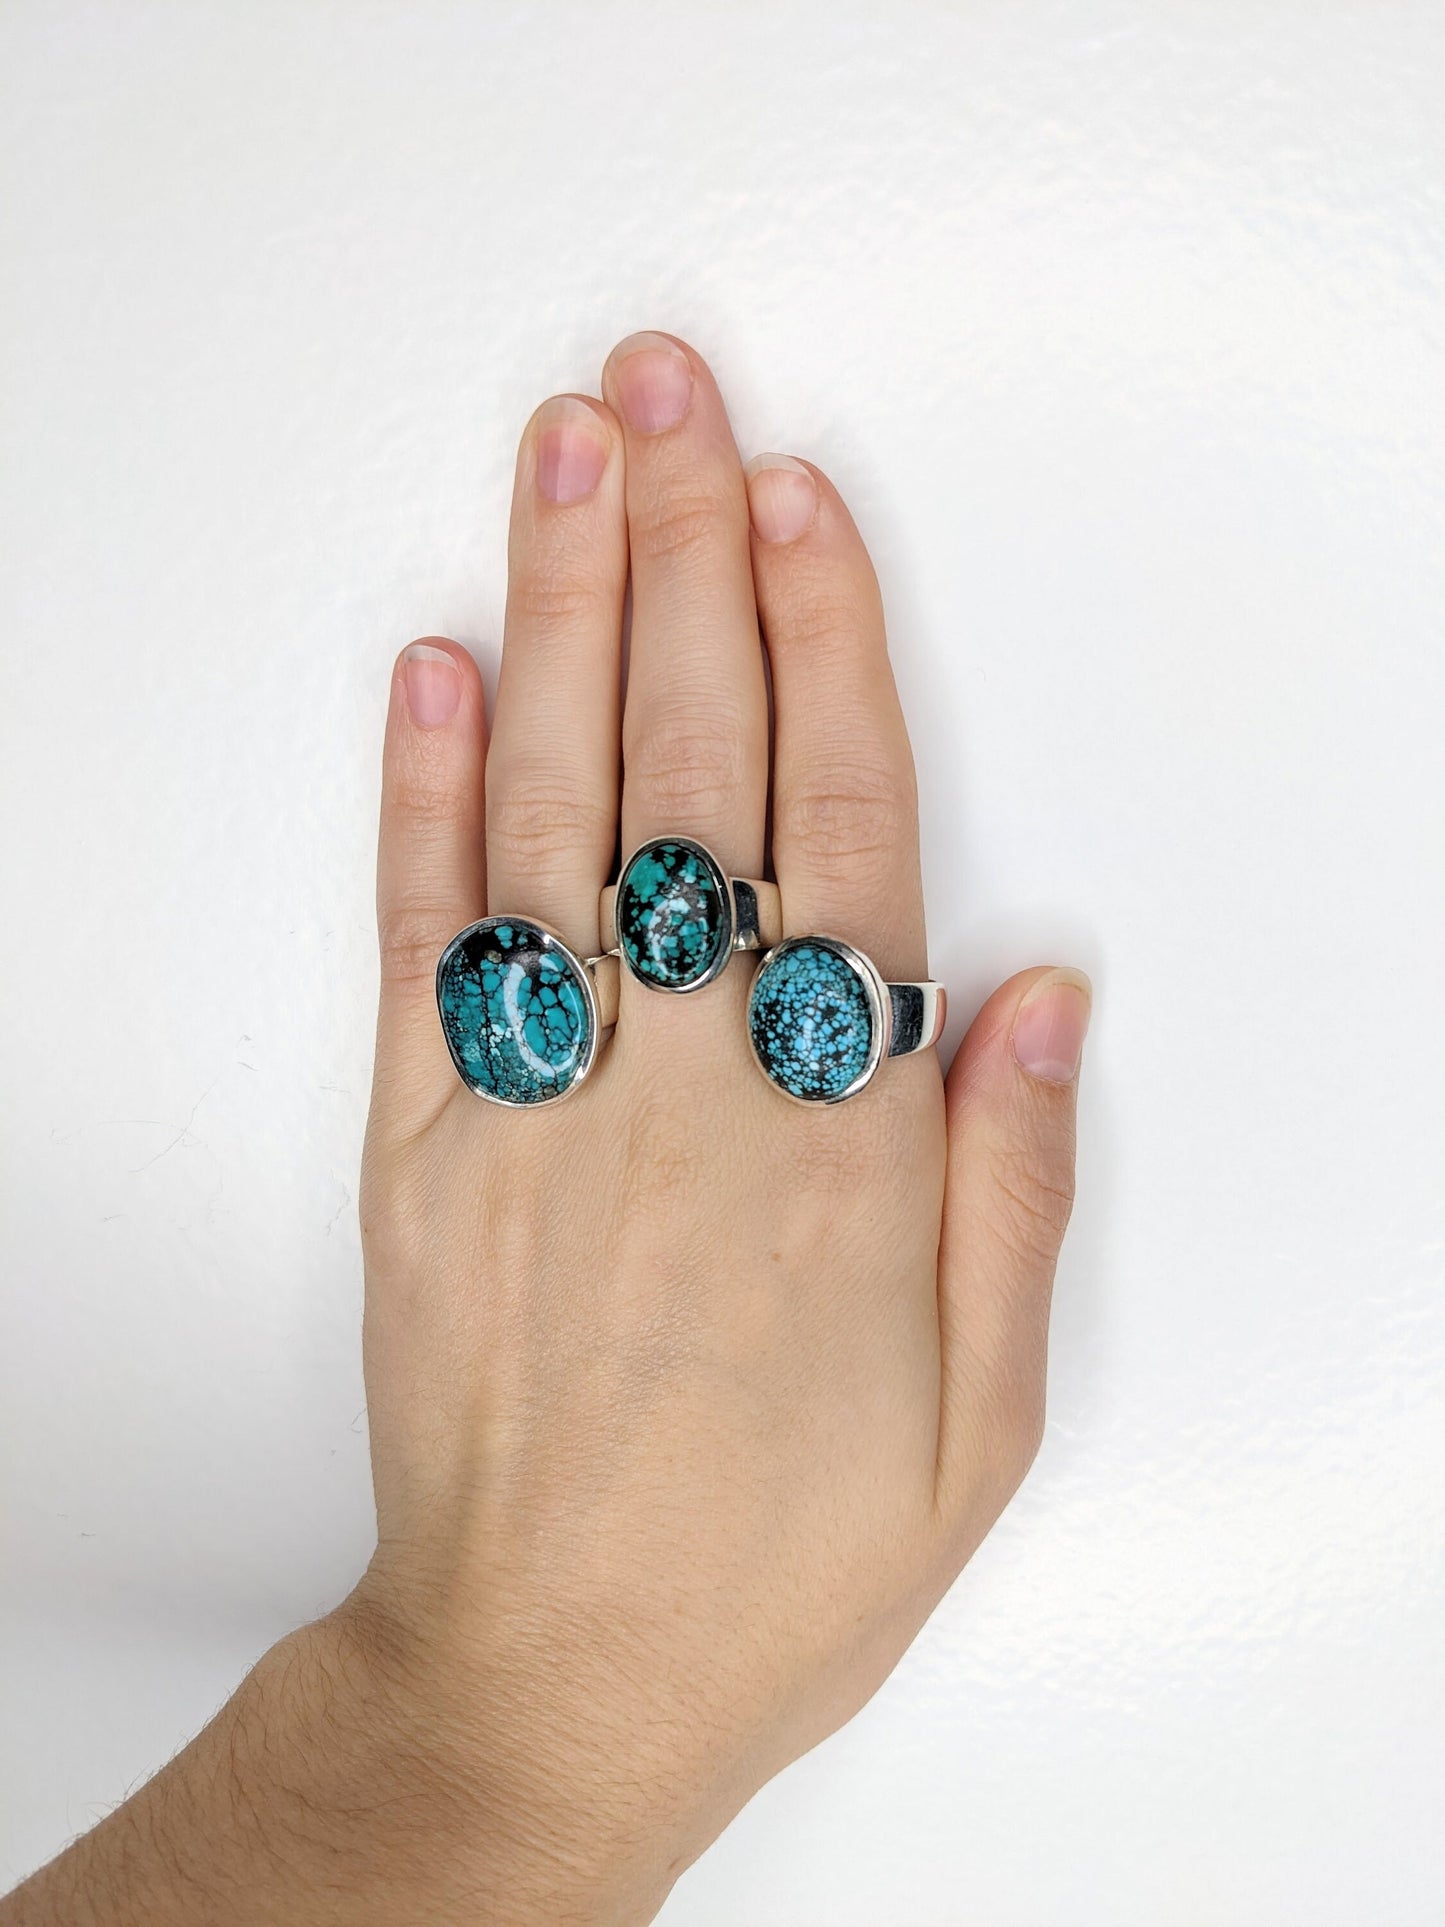 Vintage Southwest Ring Spiderweb Turquoise Sterling Silver Size 7 1/2